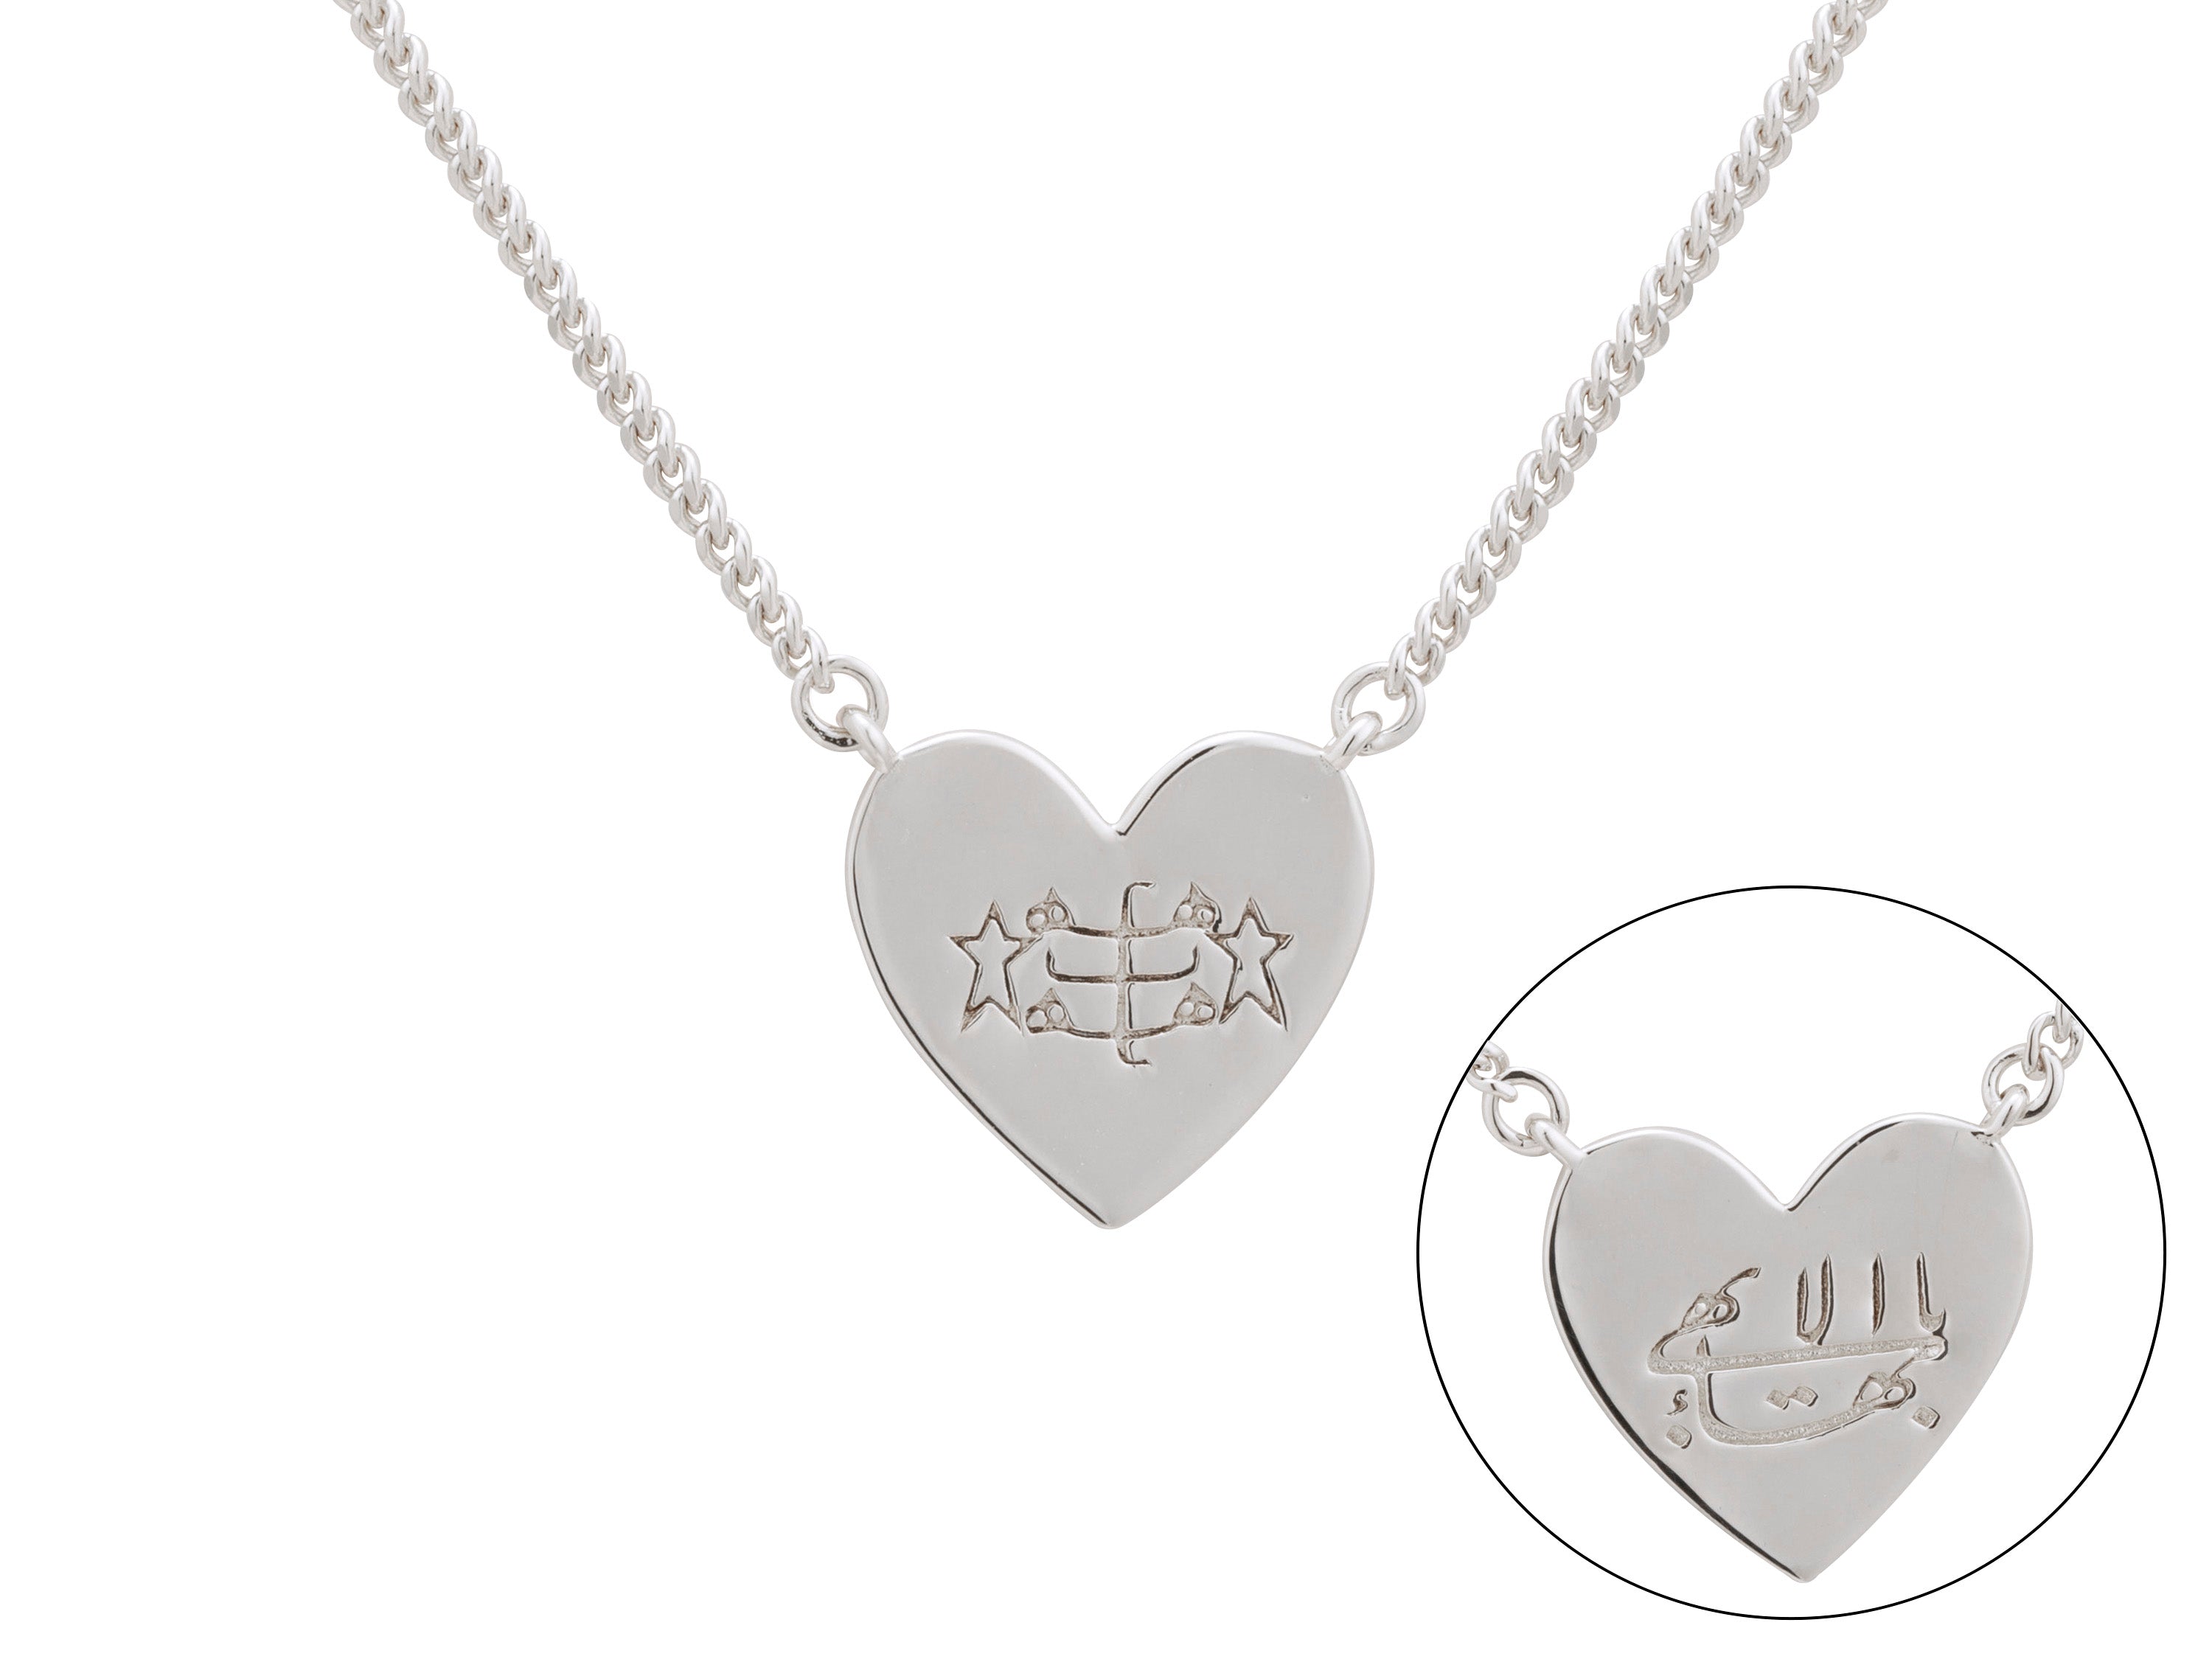 simple silver heart Bahai necklace with greatest name in arabic and ringstone symbol